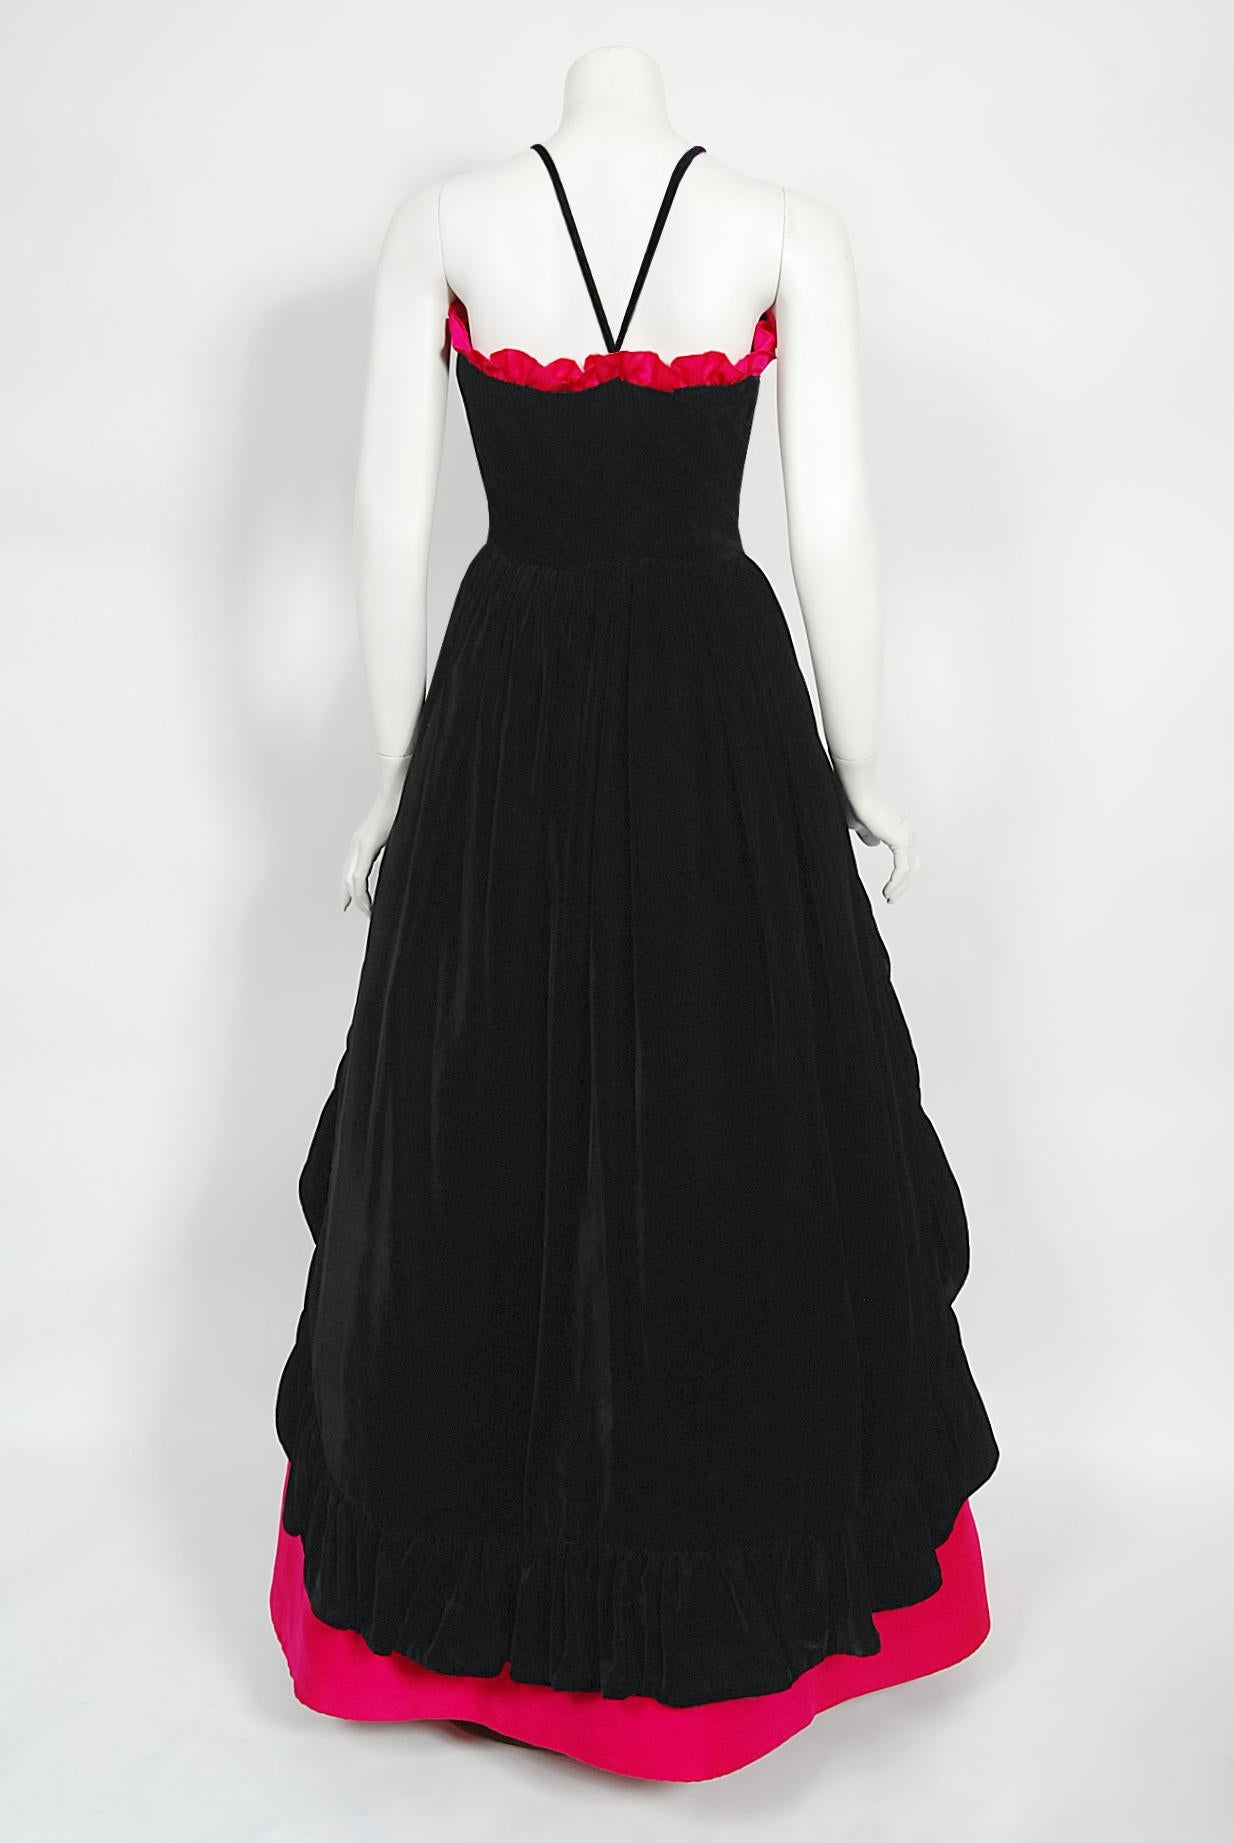 Iconic Vintage Chanel Haute Couture Black Velvet Shocking Pink Silk Halter Gown For Sale 6